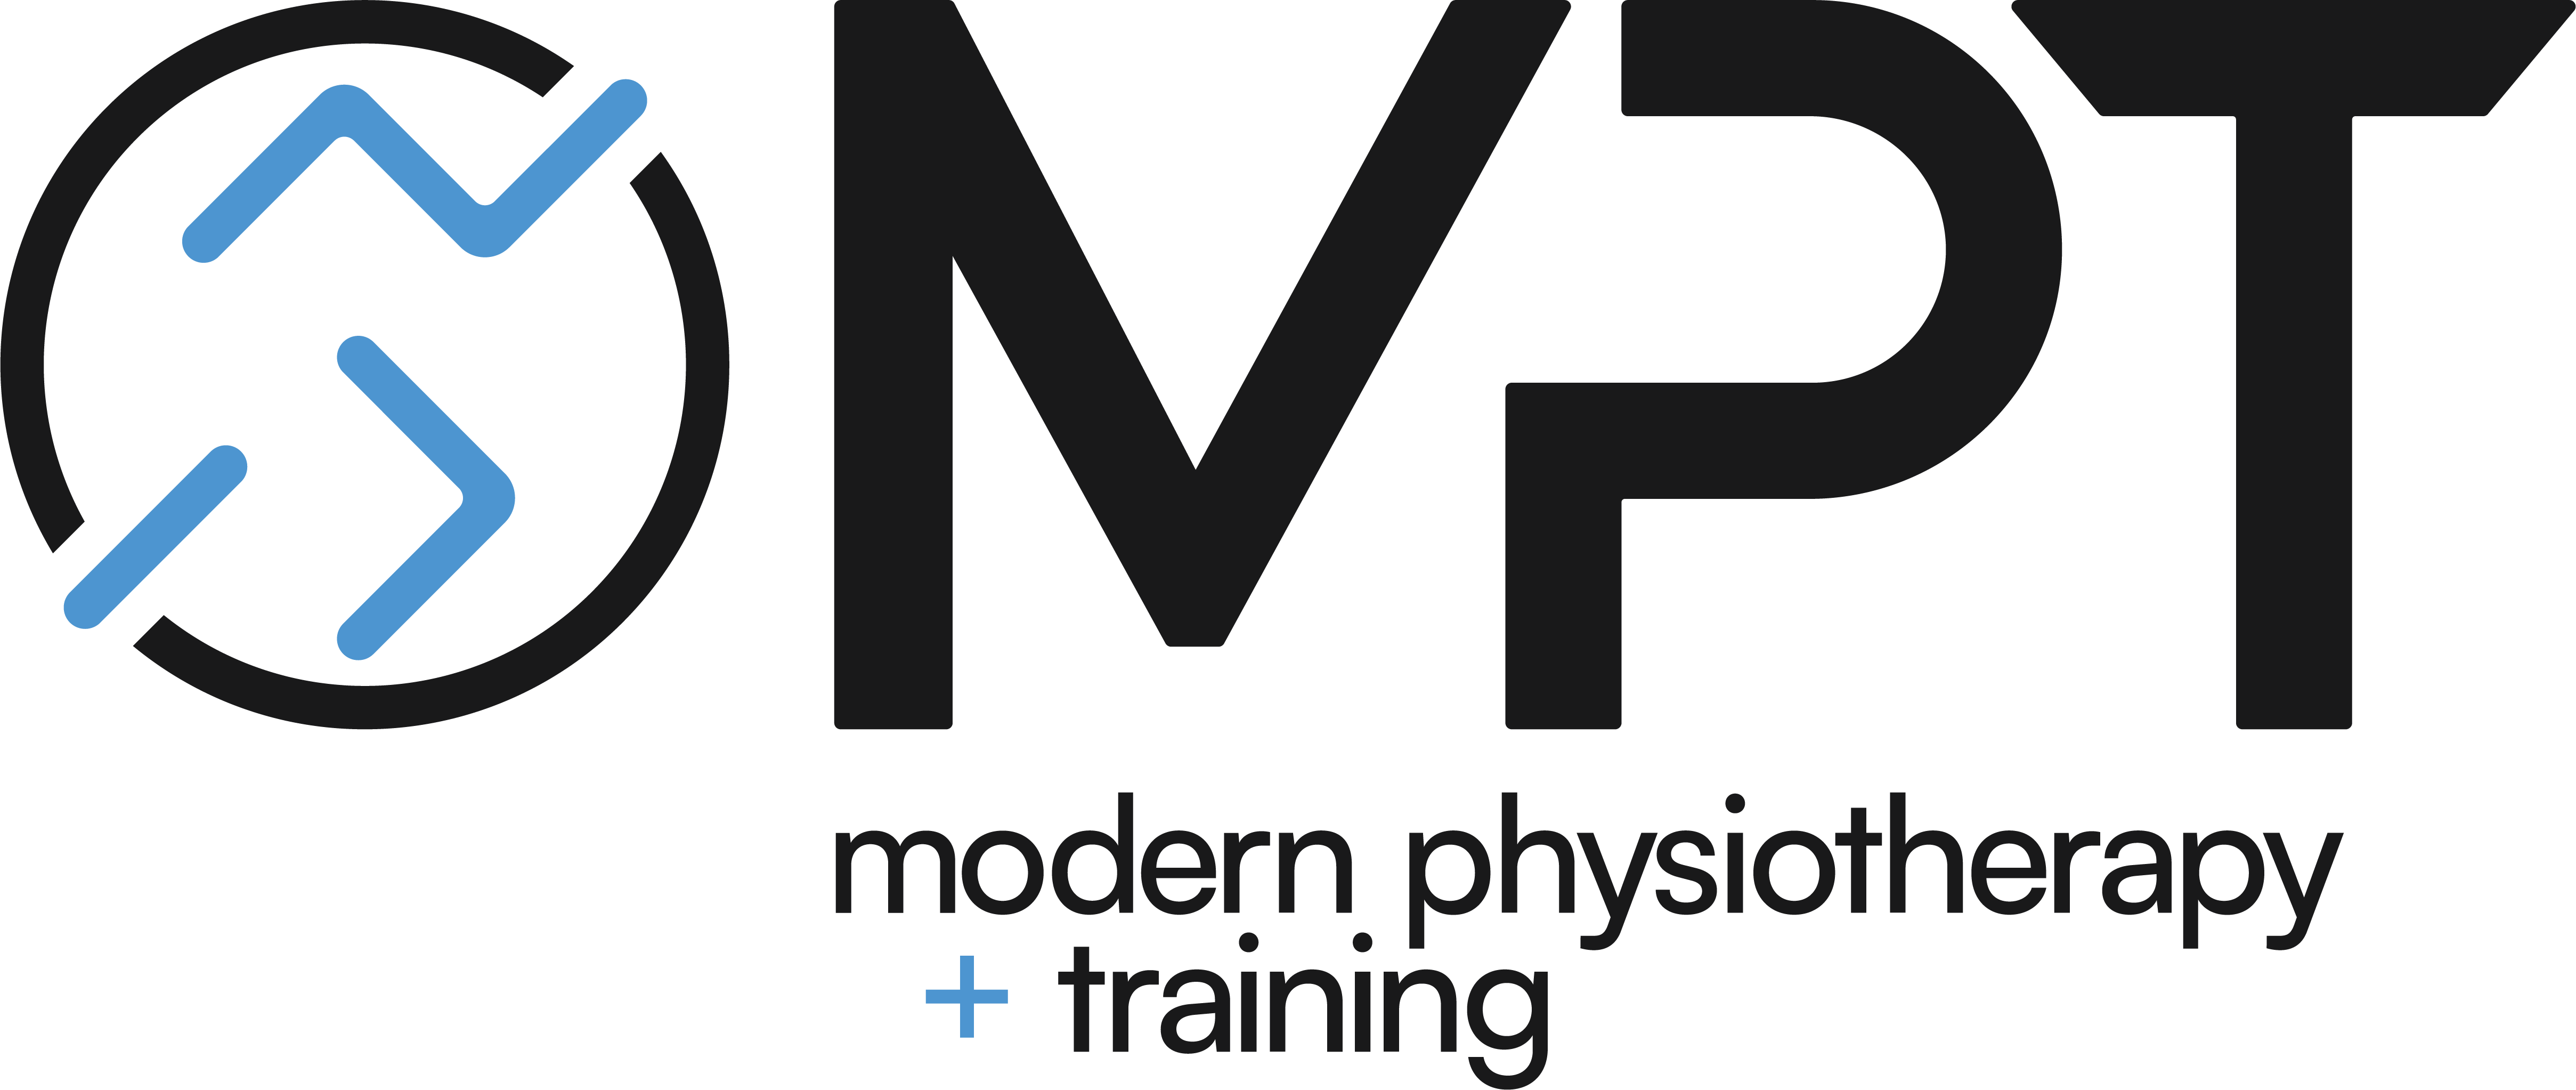 Modern Physiotherapy & Training